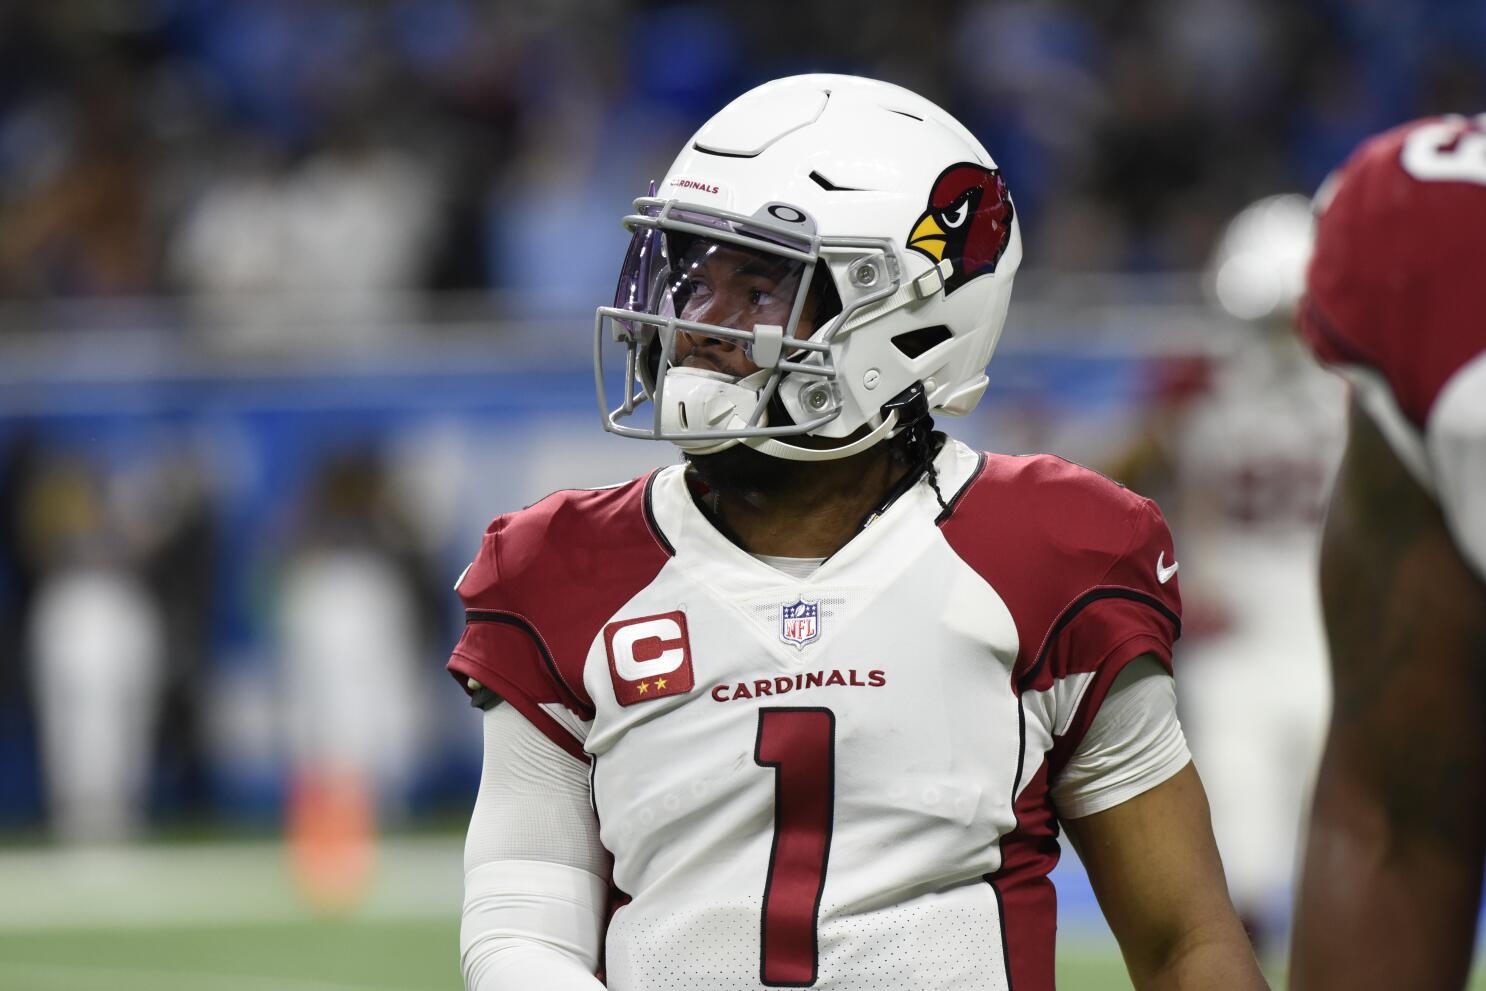 Cardinals lose chance to clinch, fall 30-12 to lowly Lions - The